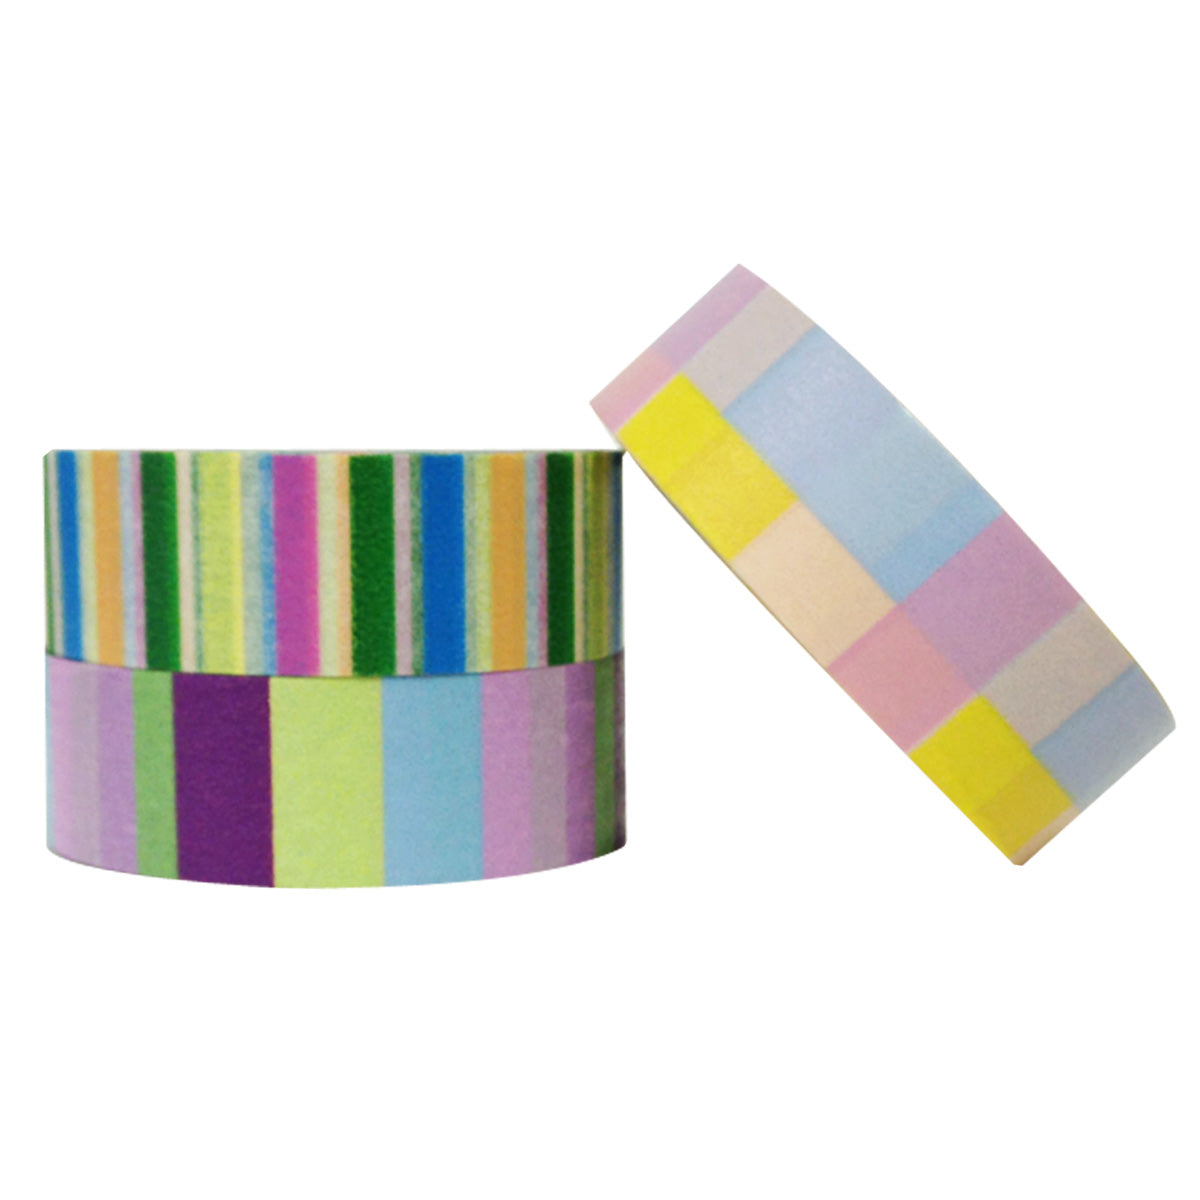 Wrapables Just For Fun Washi Masking Tape (Set of 3)